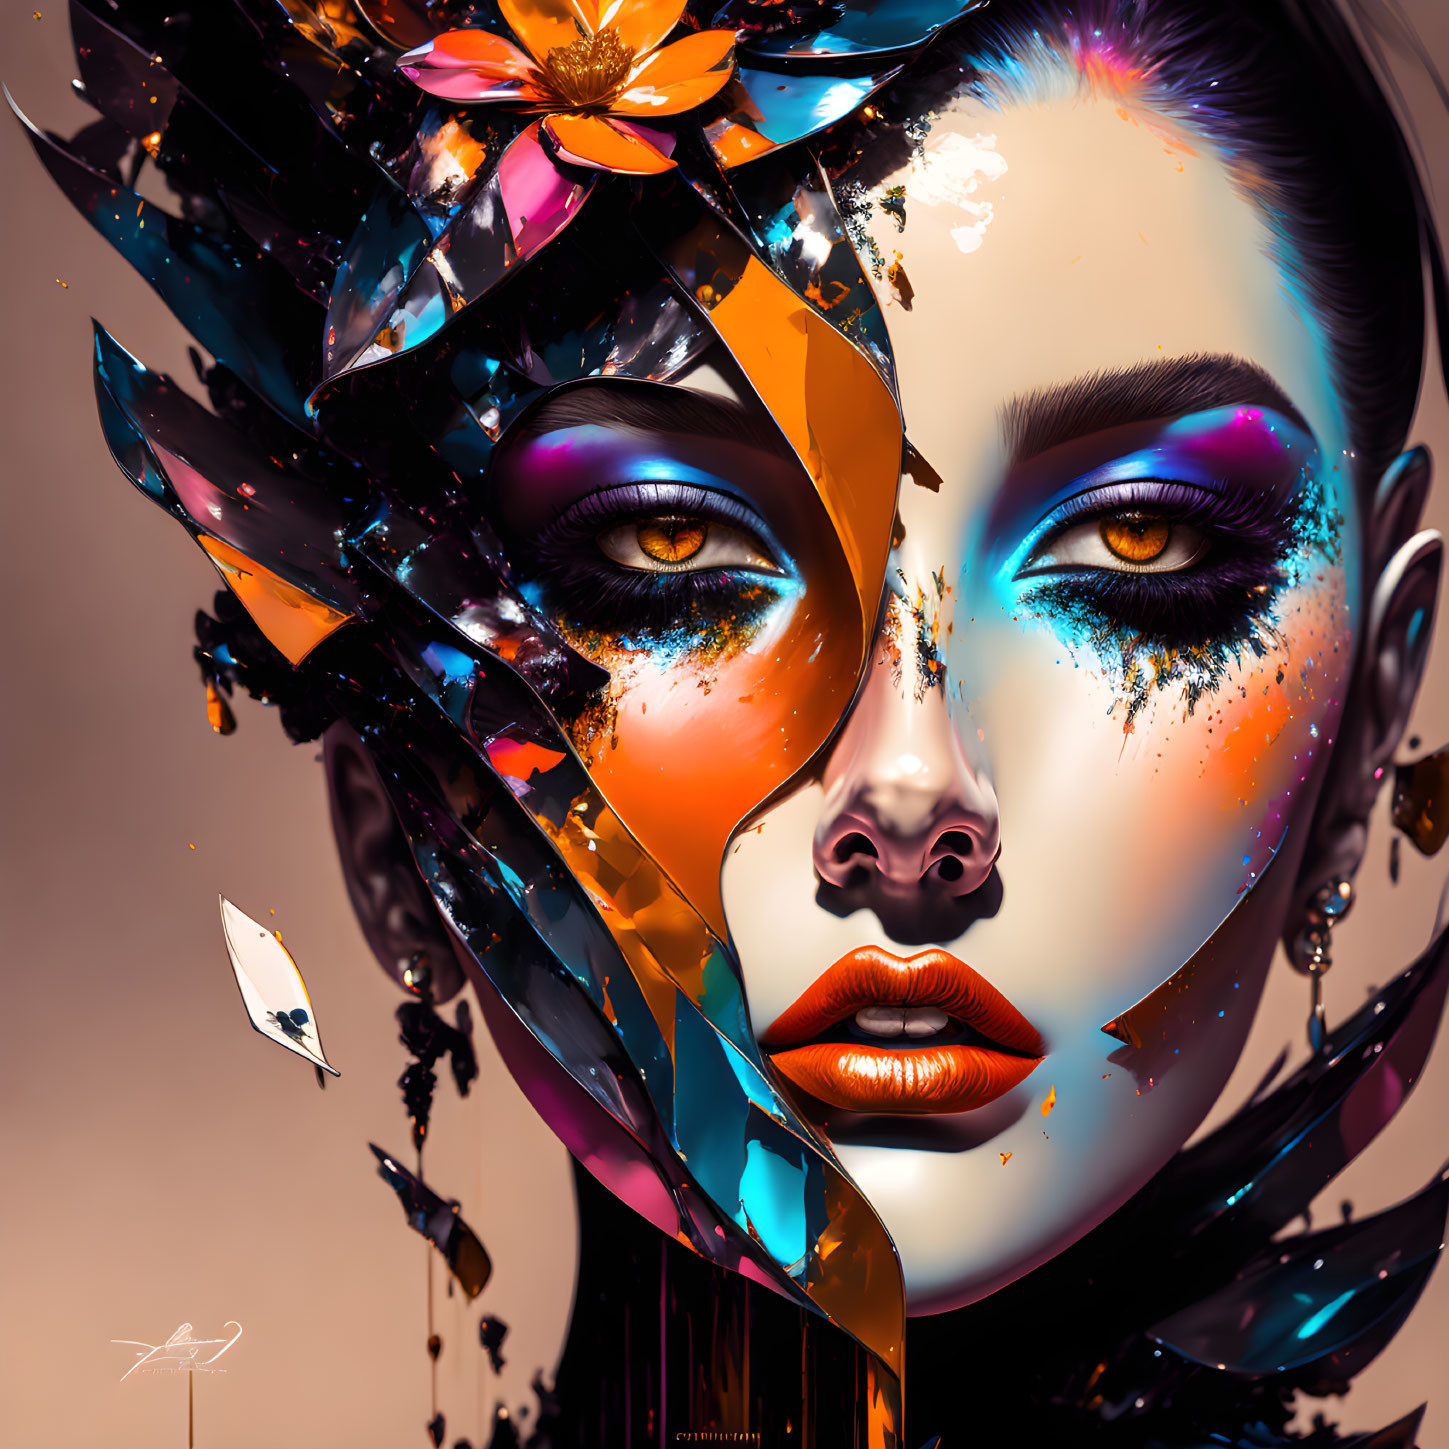 Colorful Digital Artwork: Female Face with Butterfly and Fragmented Textures